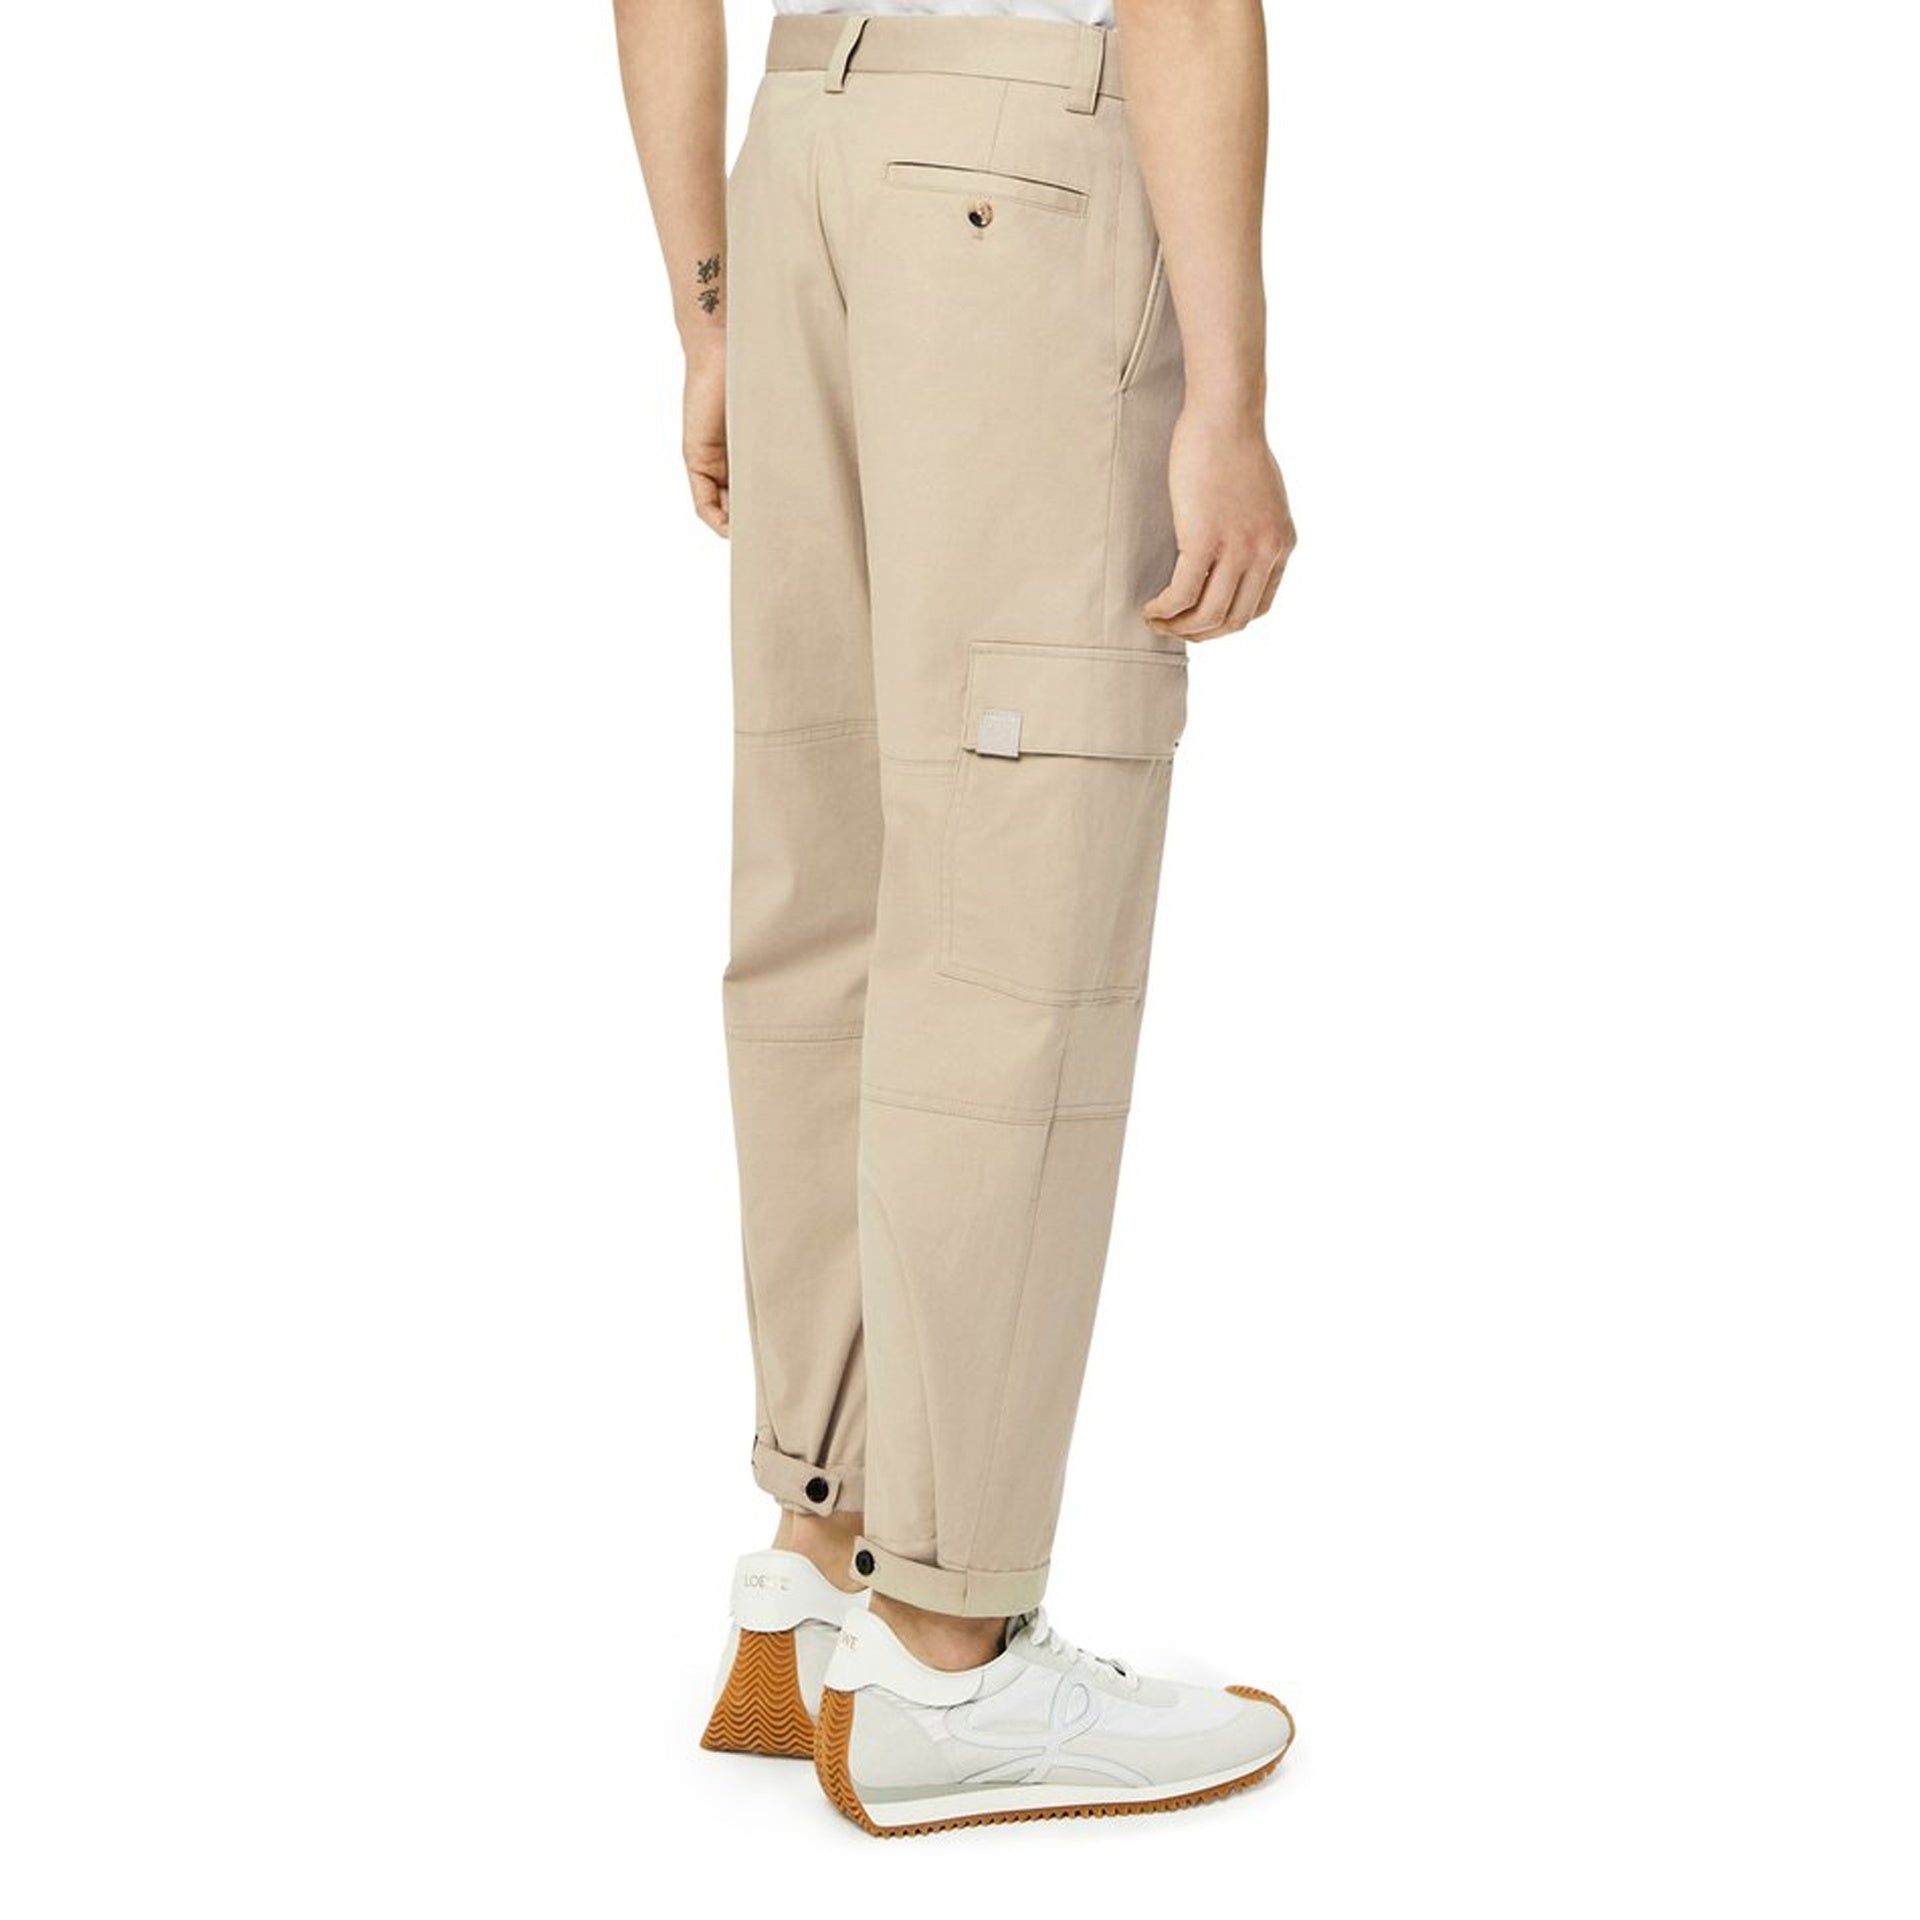 LOEWE-OUTLET-SALE-Loewe-Cropped-Cargo-Trousers-Hosen-ARCHIVE-COLLECTION-3.jpg